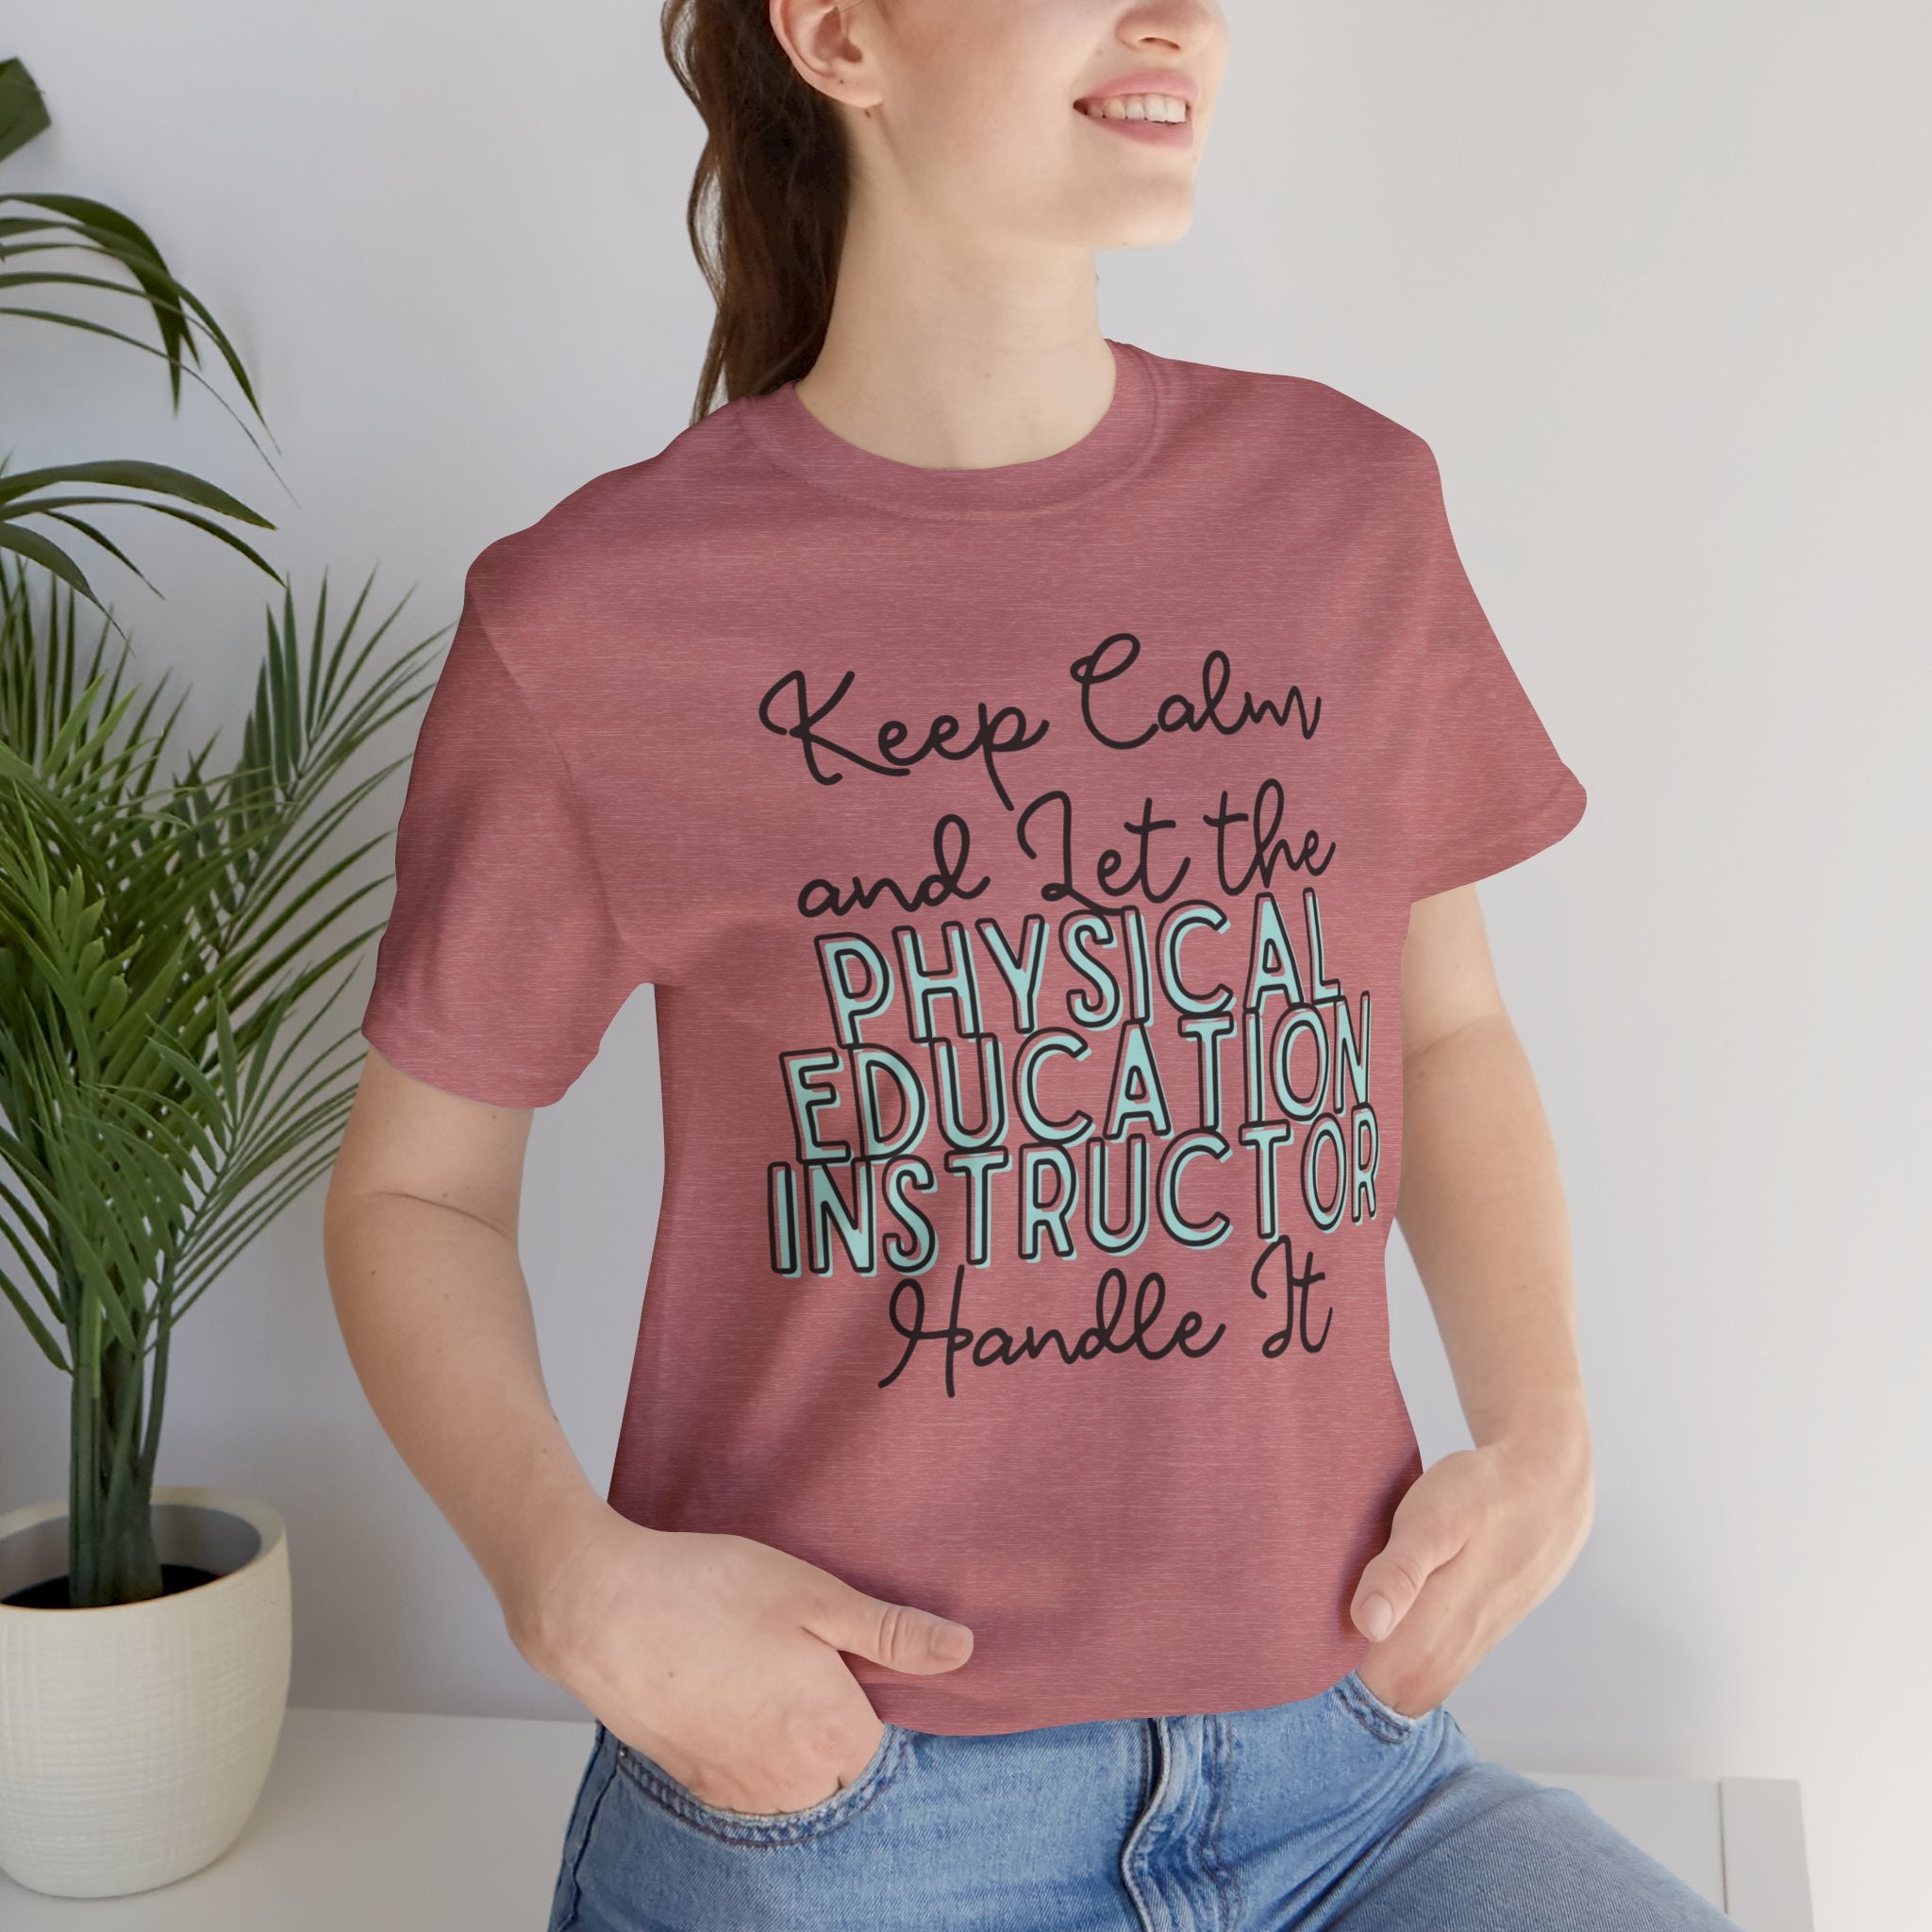 Keep Calm and let the Physical Education Instructor handle It - Jersey Short Sleeve Tee